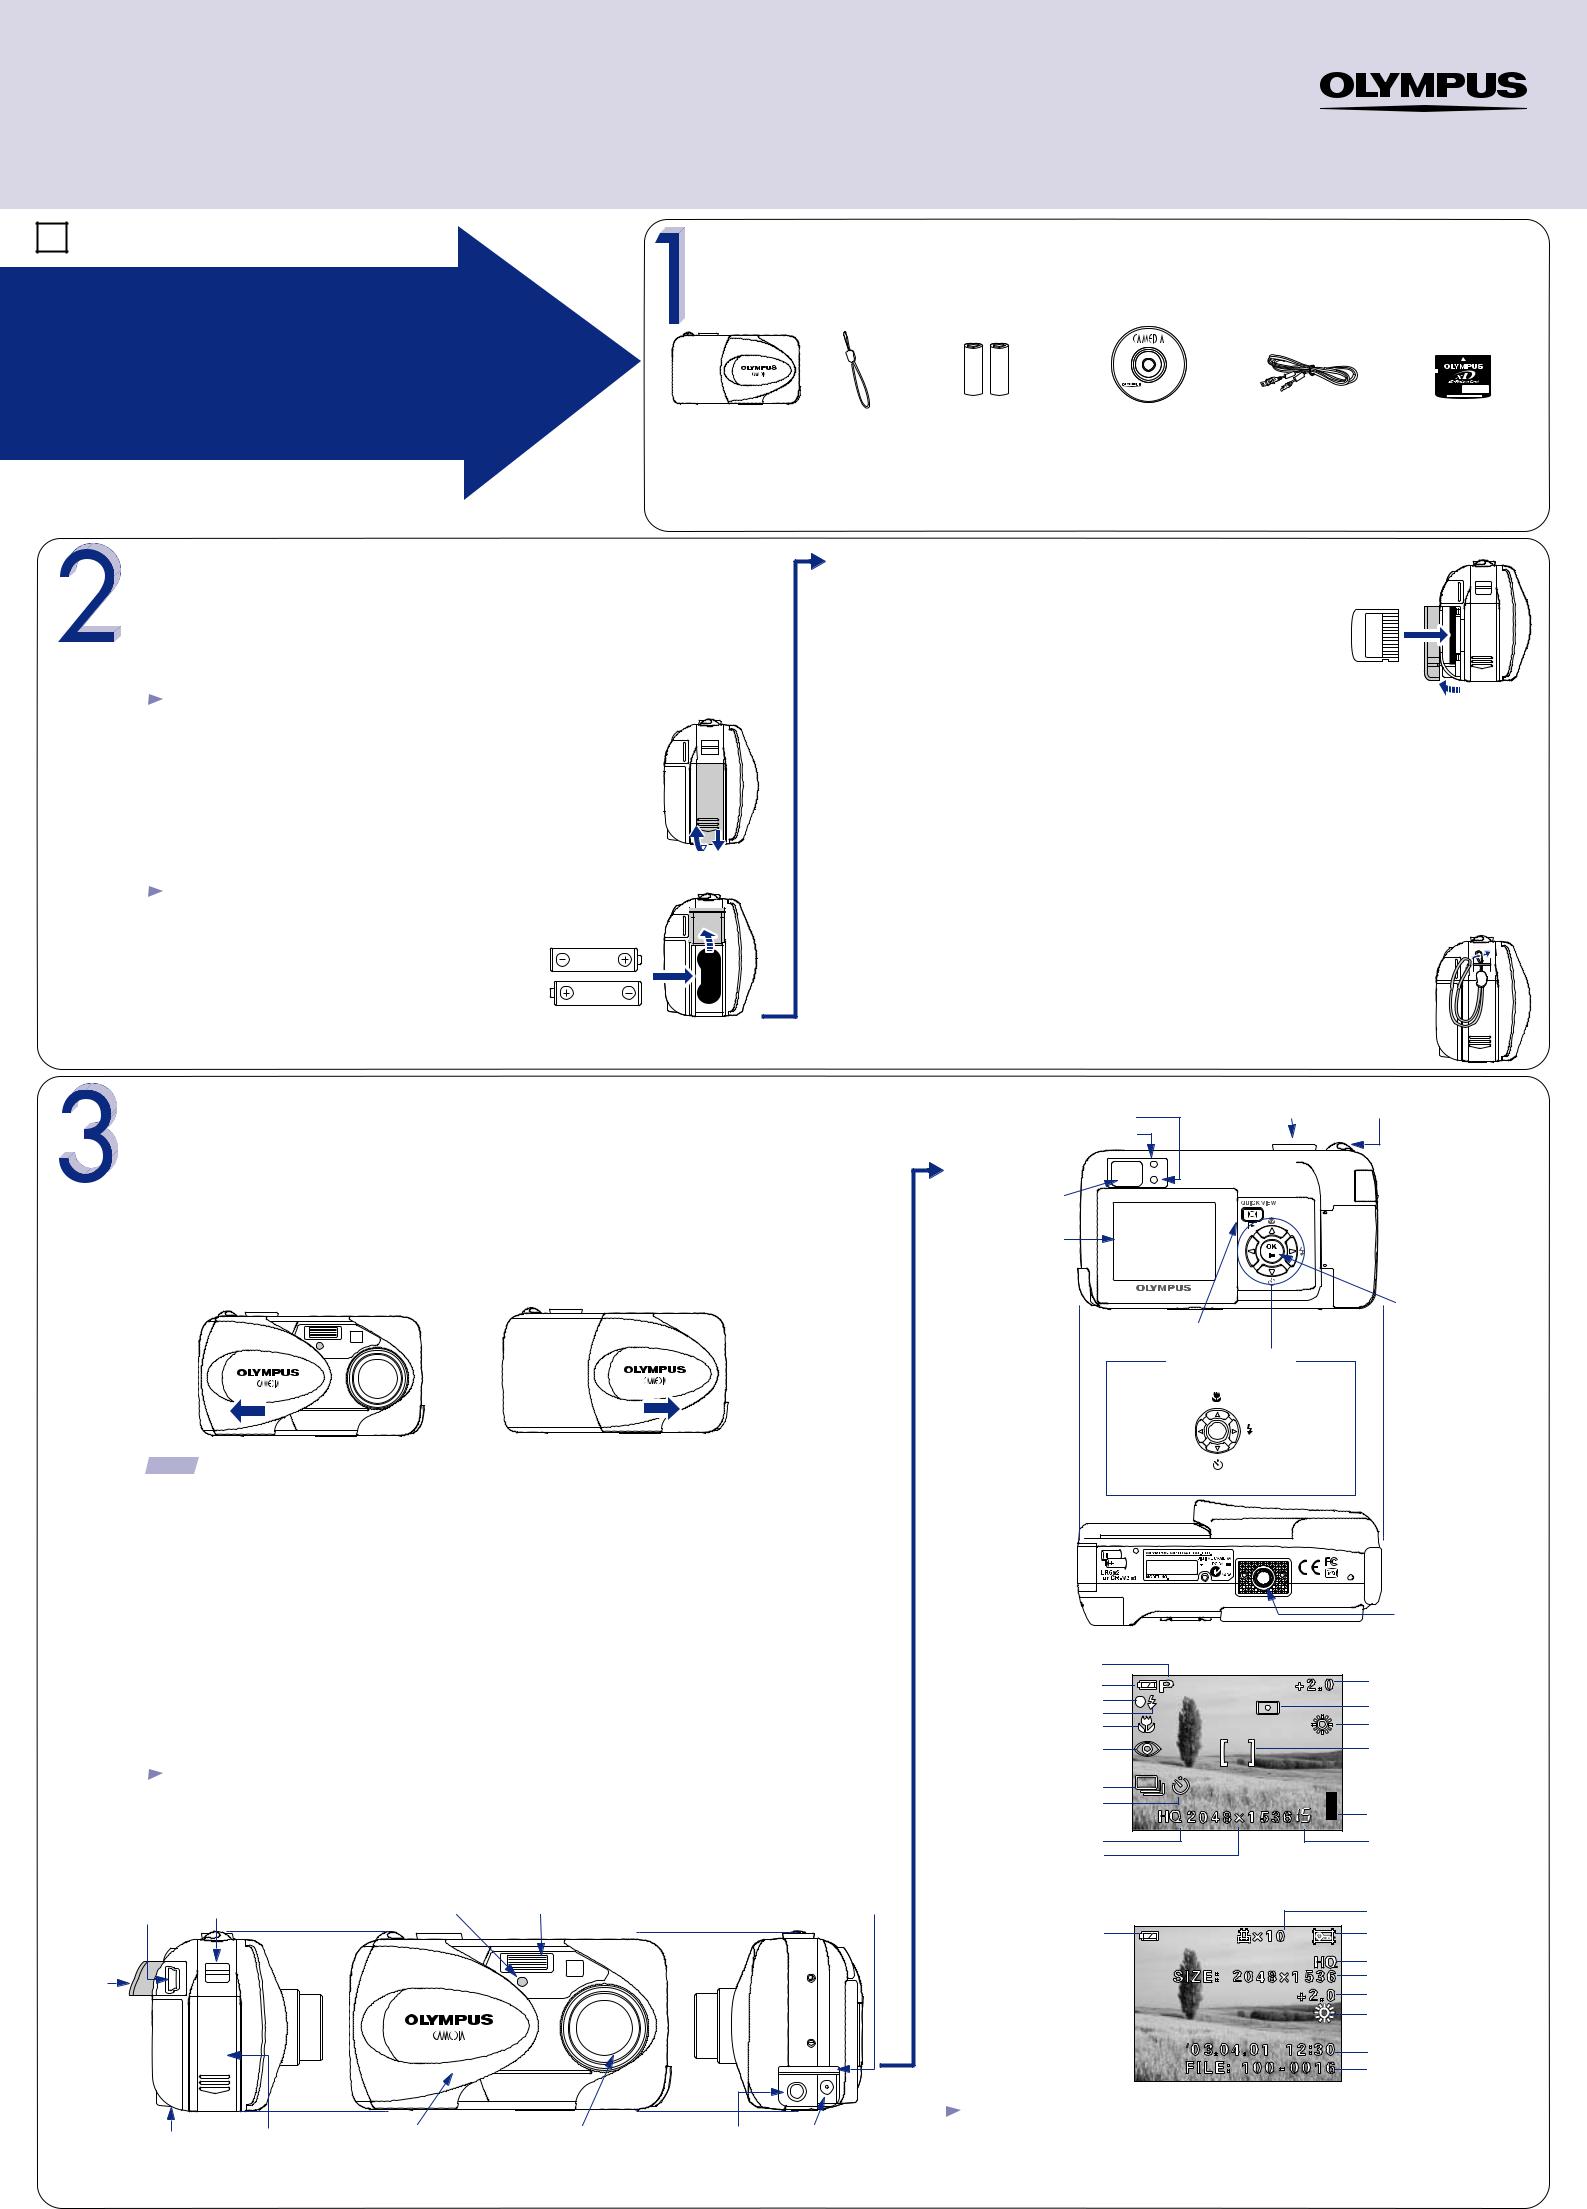 Olympus D-560ZOOM, C-350ZOOM, X-200 Quick start guide